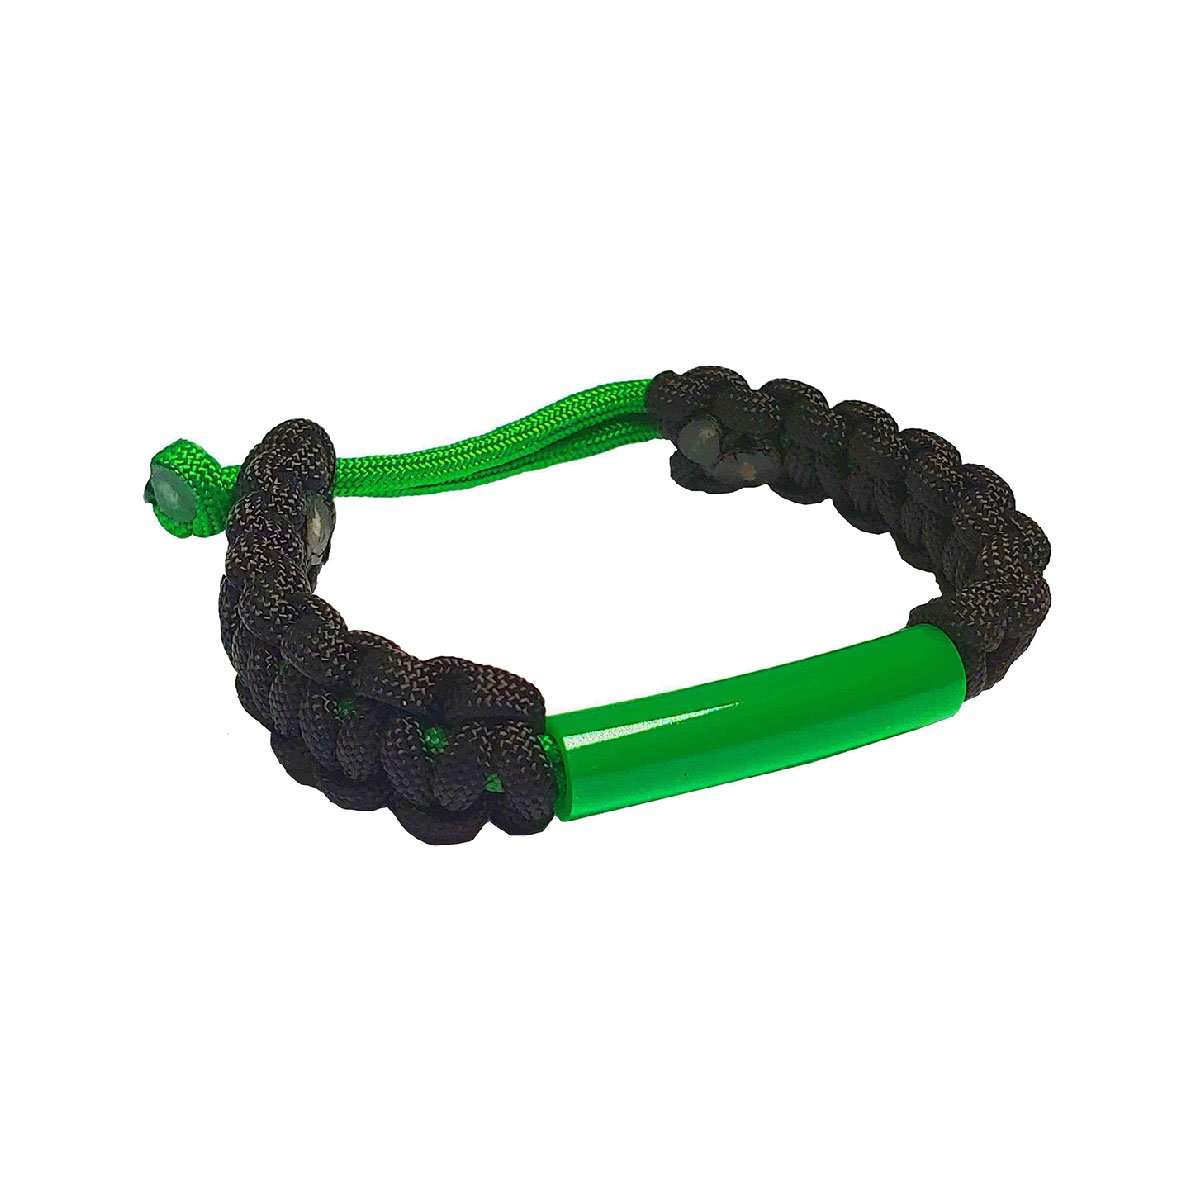 ChuBuddy Parachewer Bracelet - Green (Super Strong) Chewy Oral Motor Tool